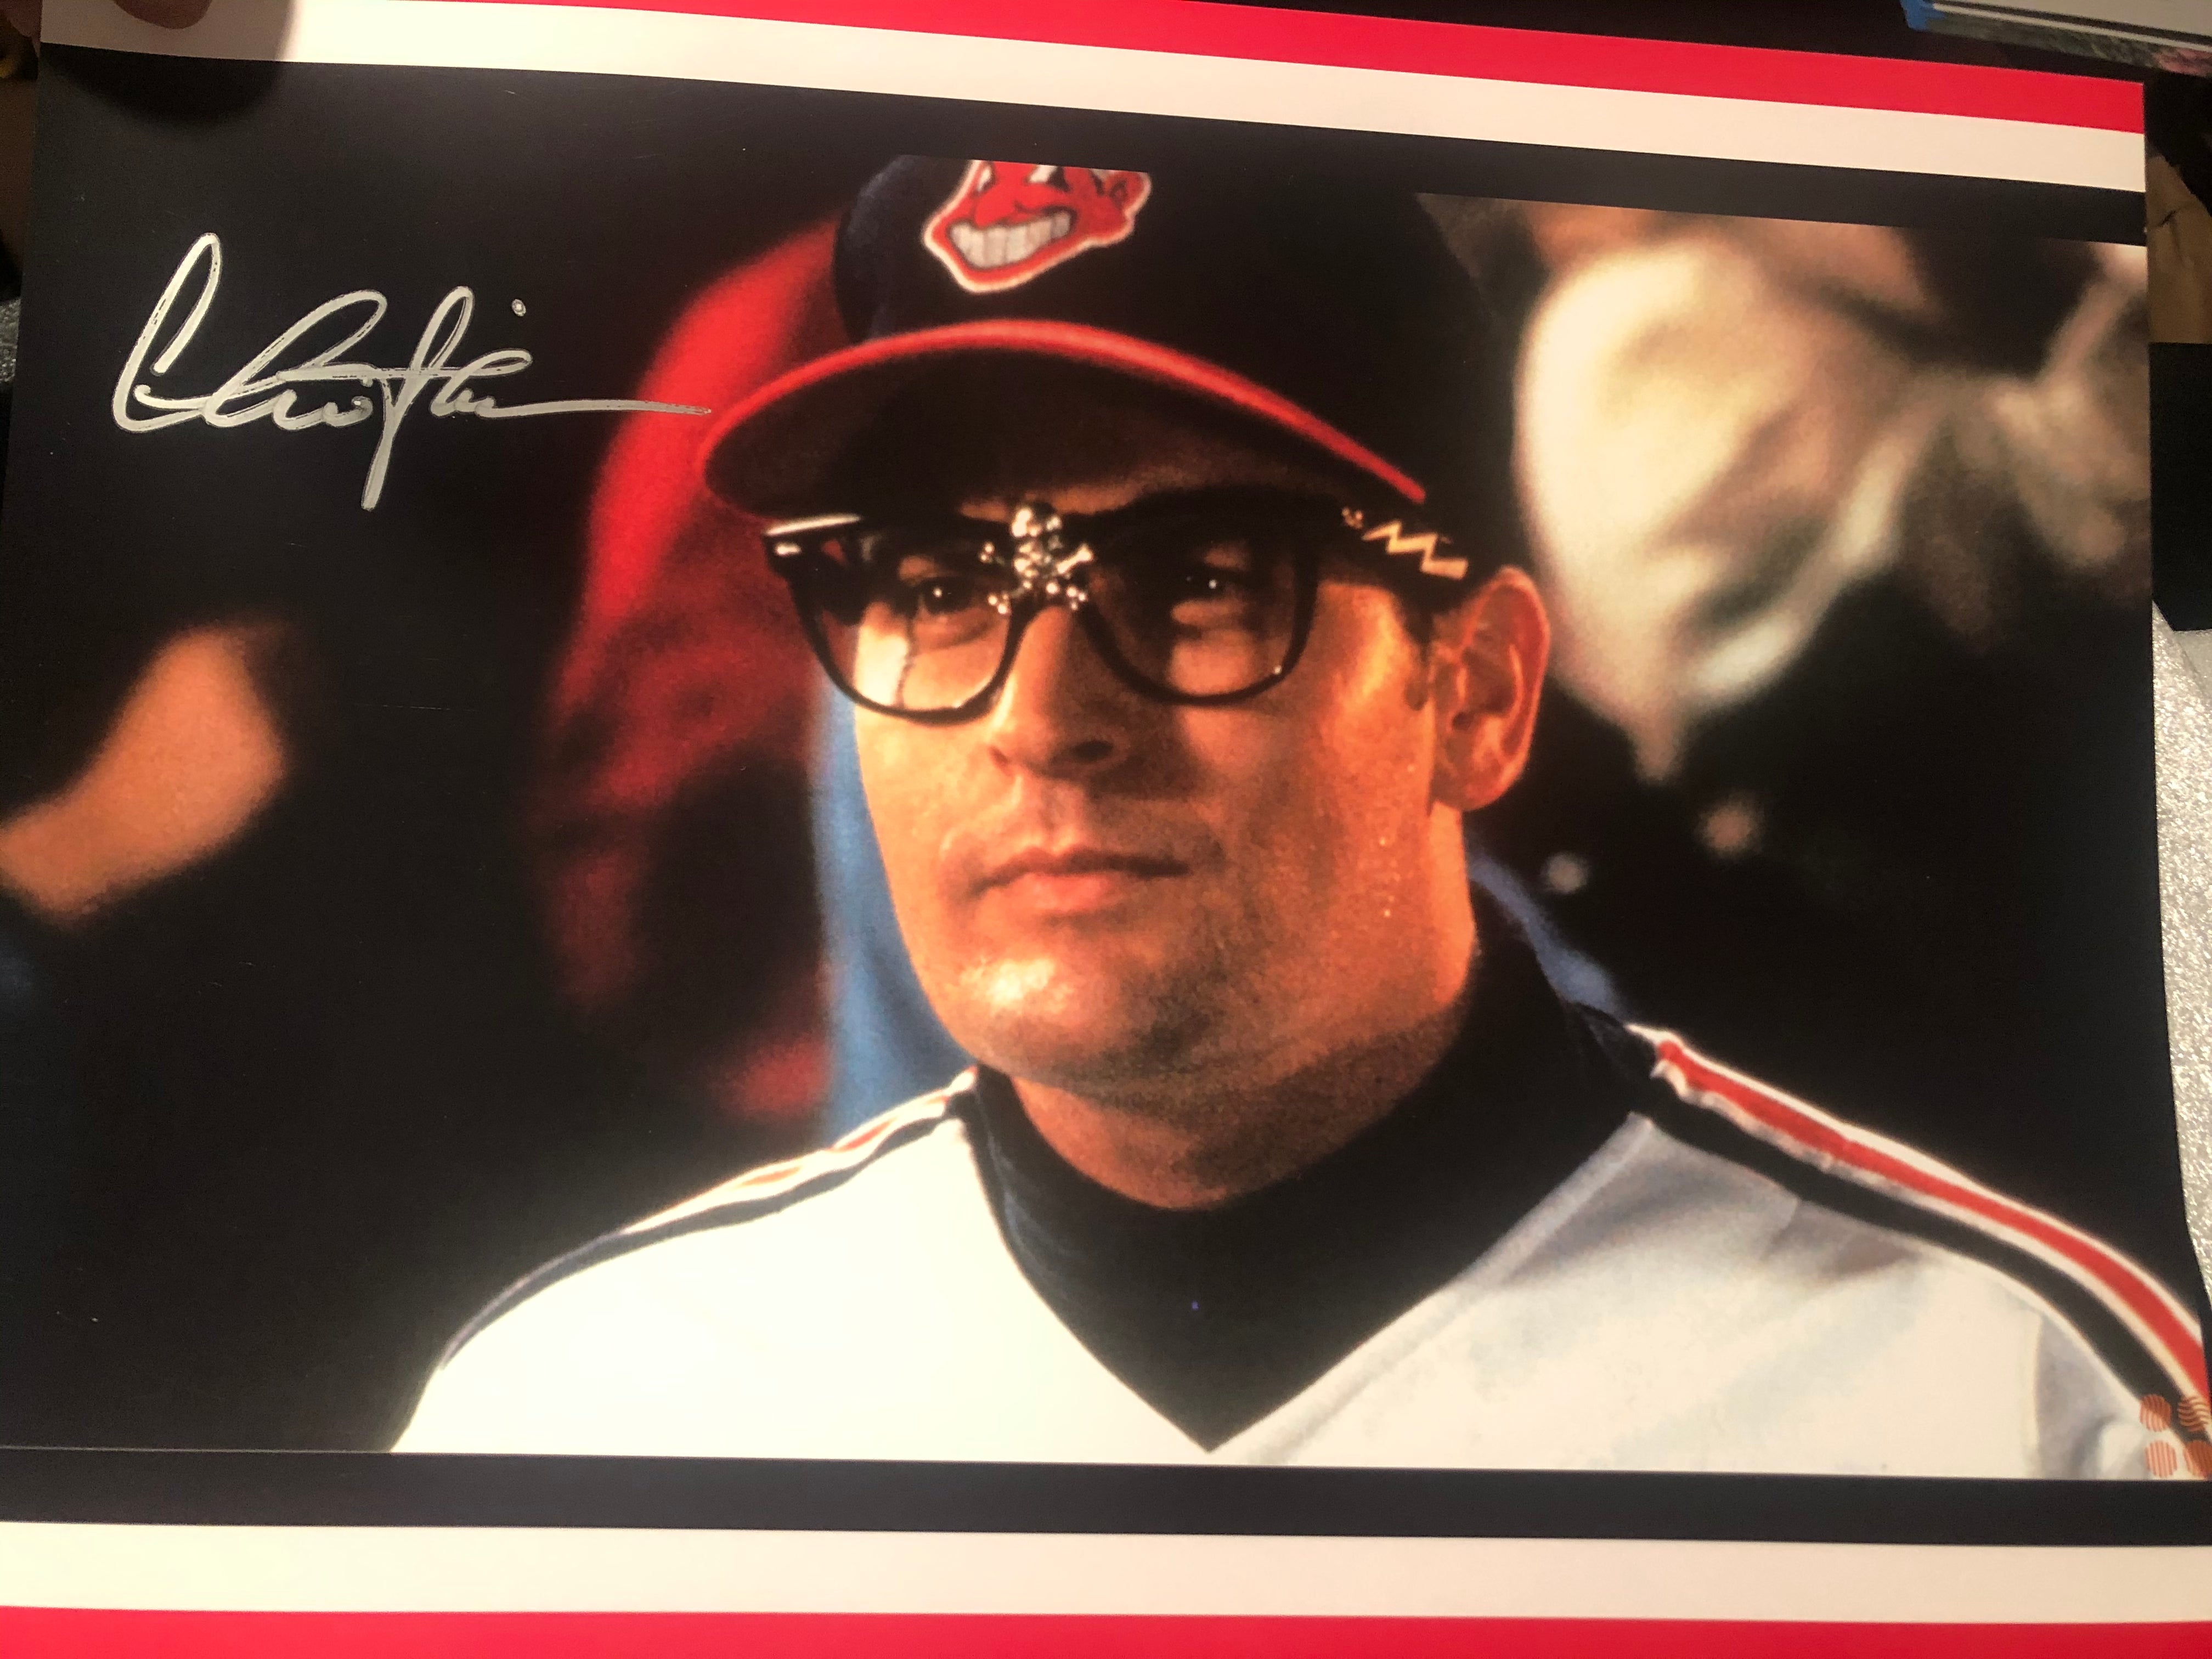 Charlie Sheen Signed Major League 16x20 Photo (MAB) Ricky Wild Thin –  Super Sports Center